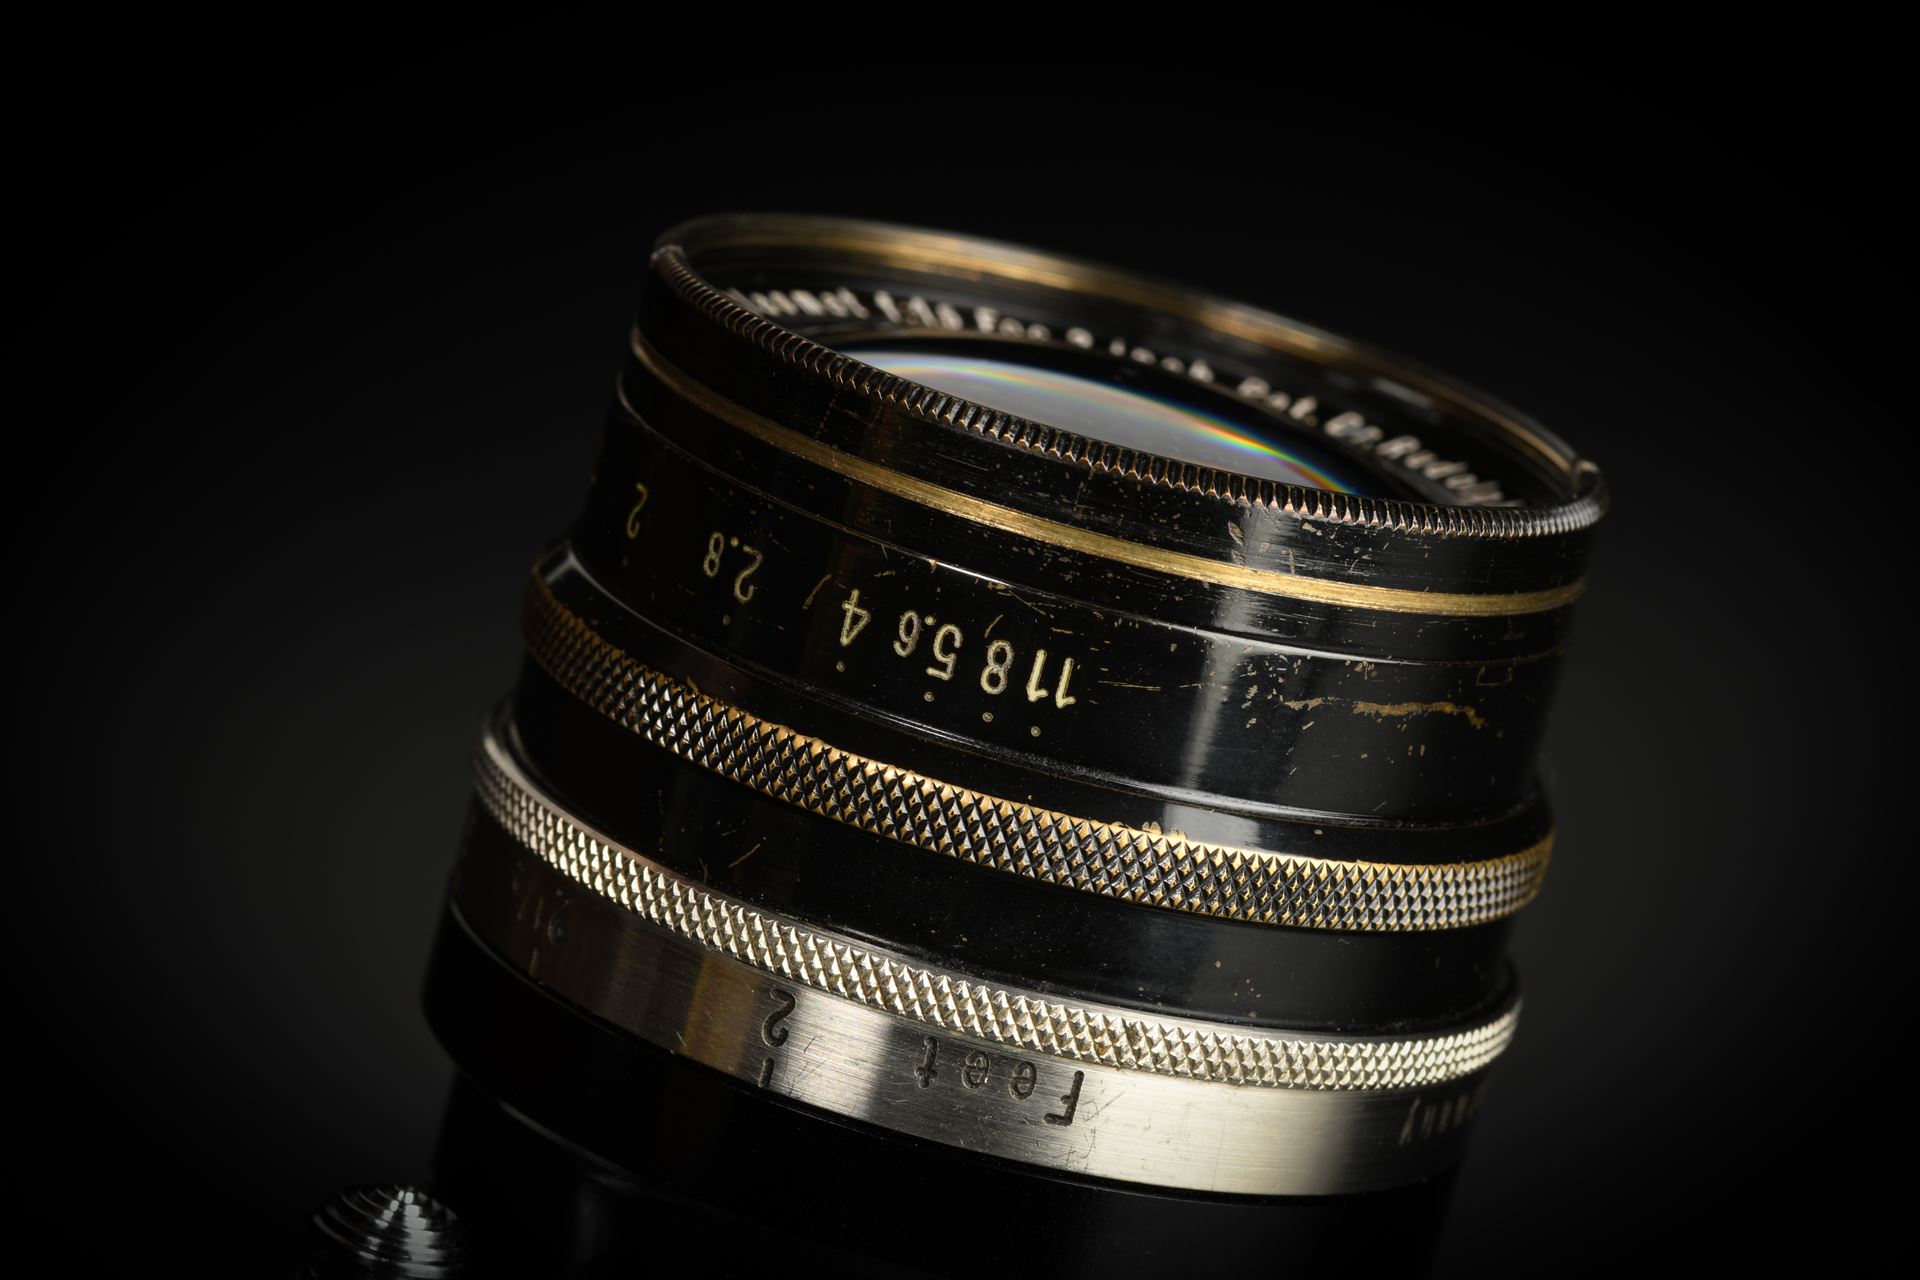 Picture of Hugo Meyer Kino-Plasmat 2inch 50mm f/1.5 Modified to Leica M